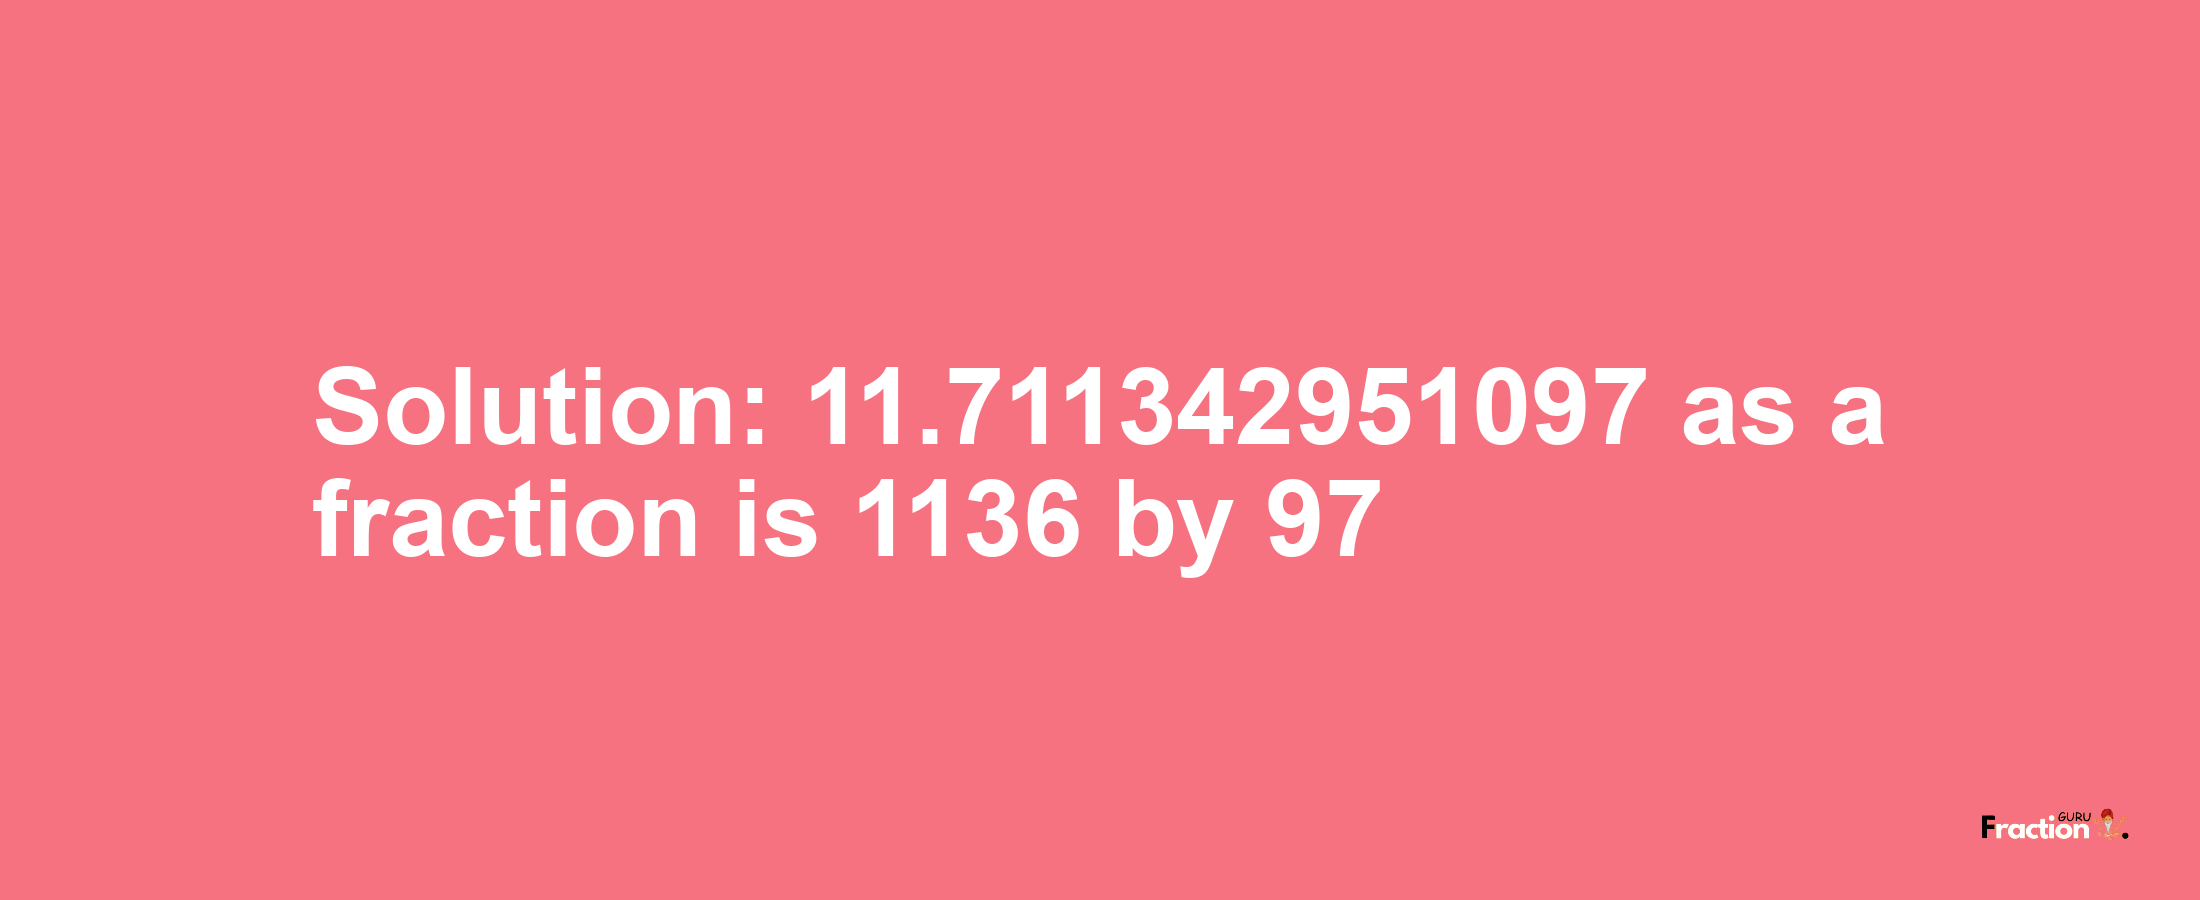 Solution:11.711342951097 as a fraction is 1136/97